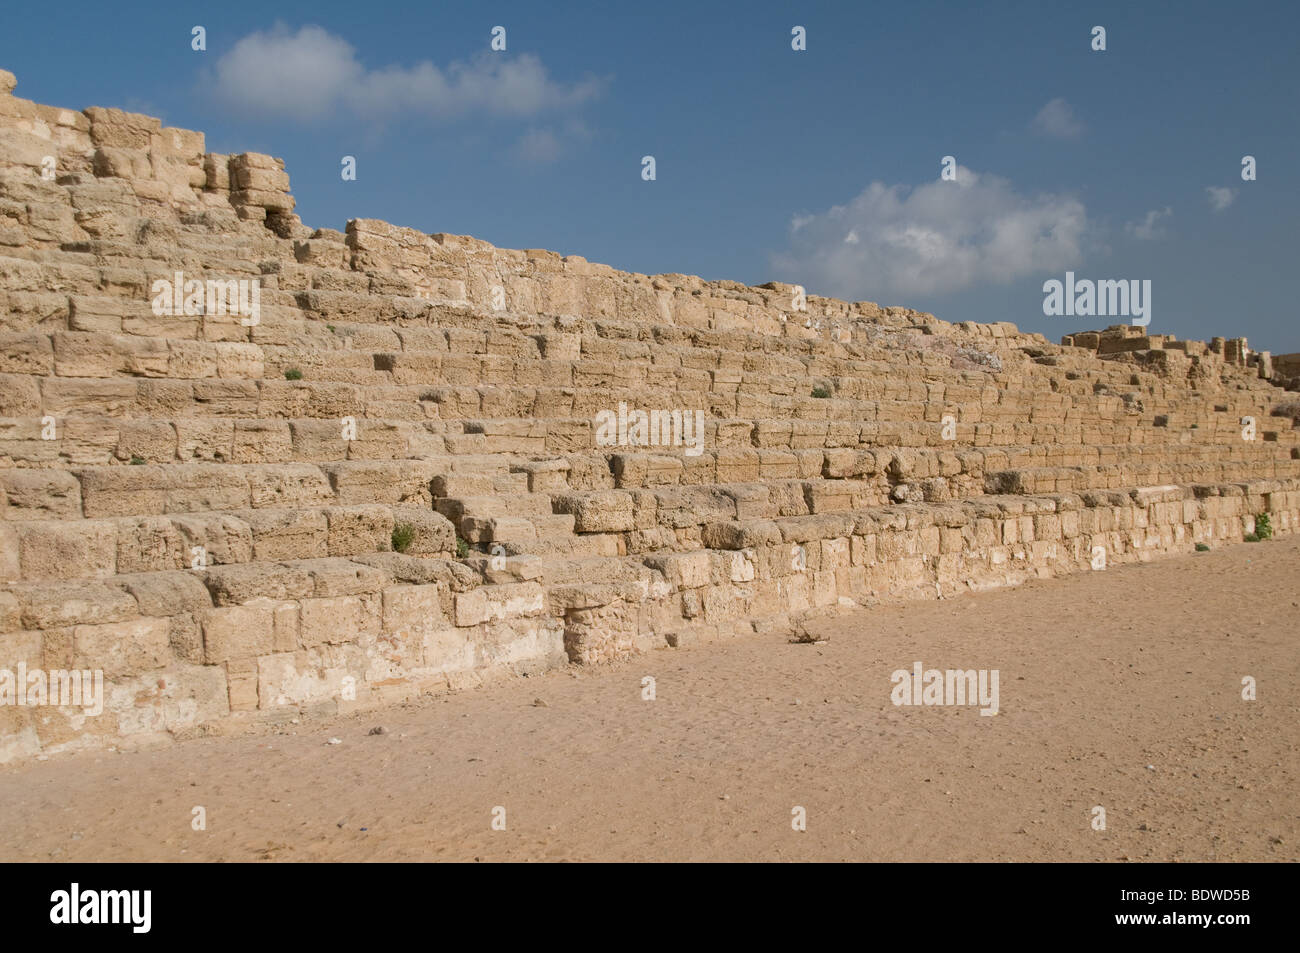 stone stepped wall in caesarea, israel Stock Photo